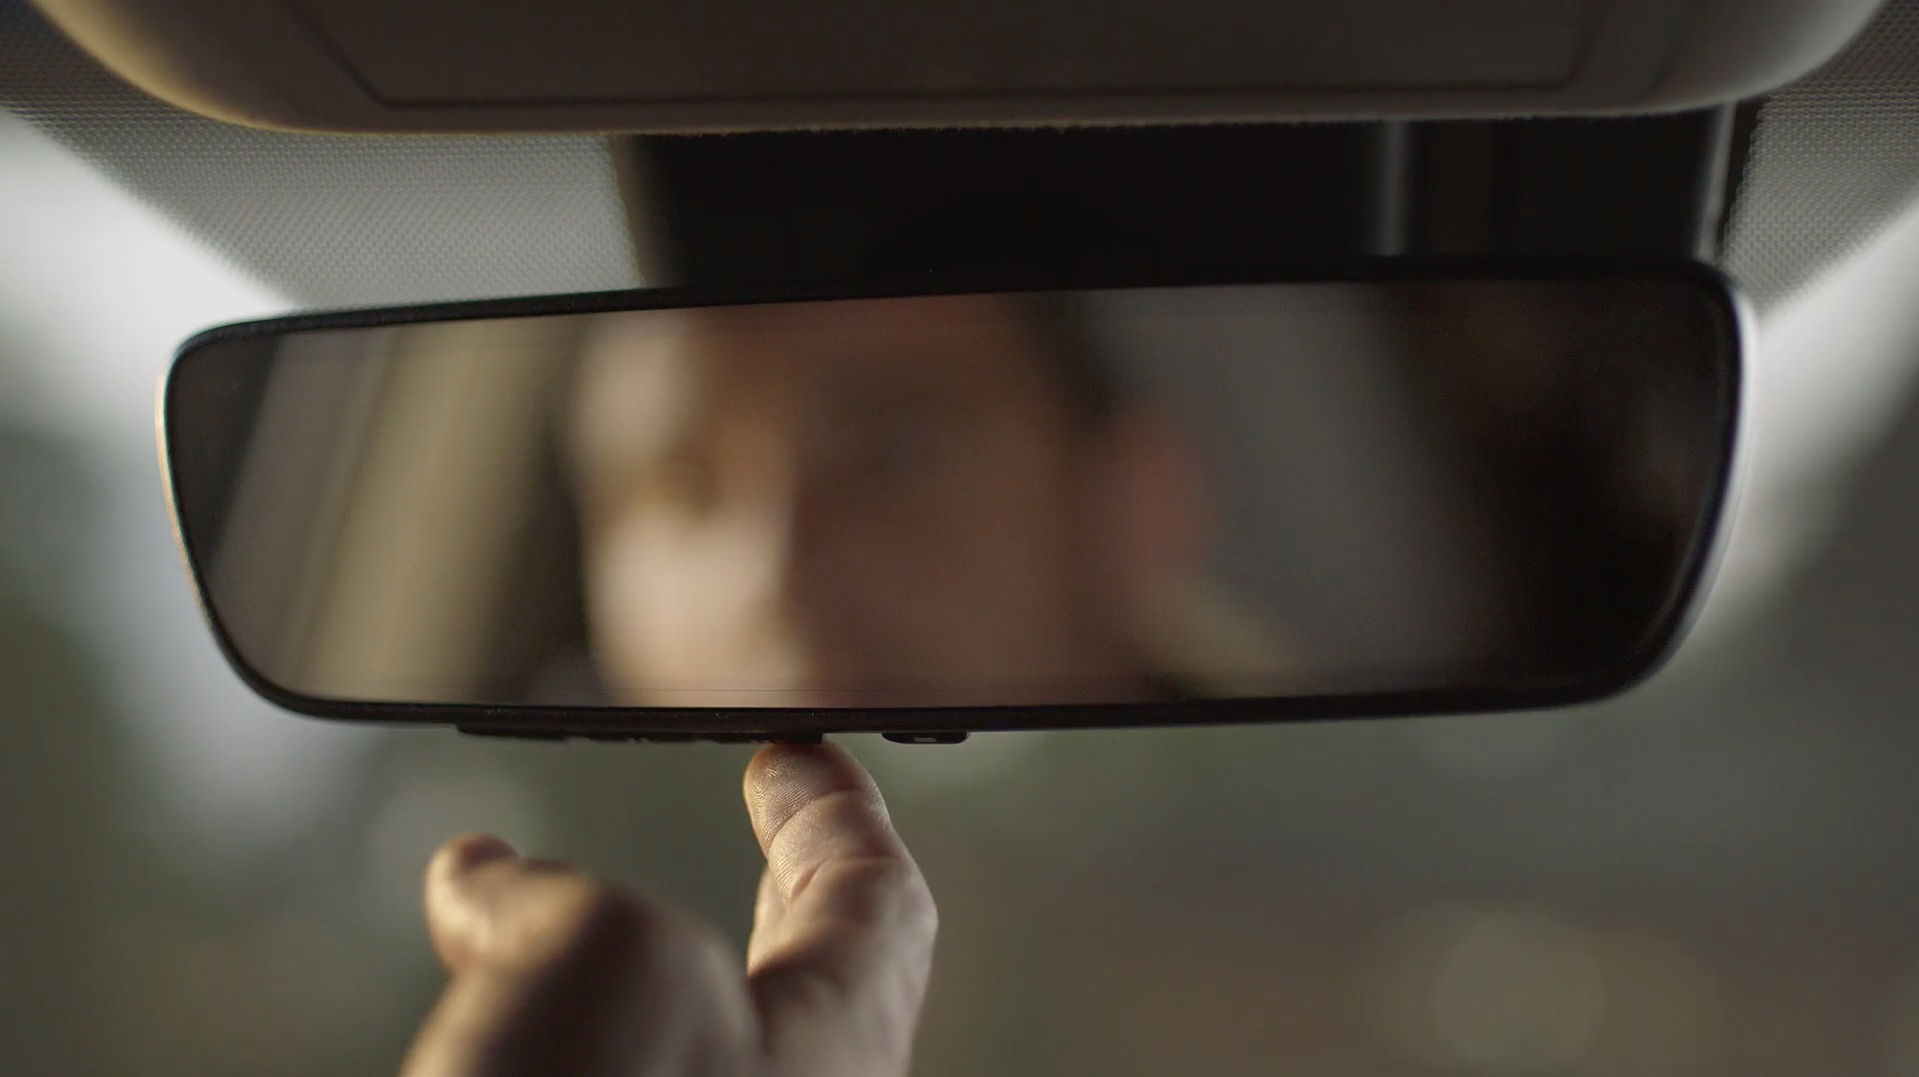 image of man pressing HomeLink button on rearview mirror